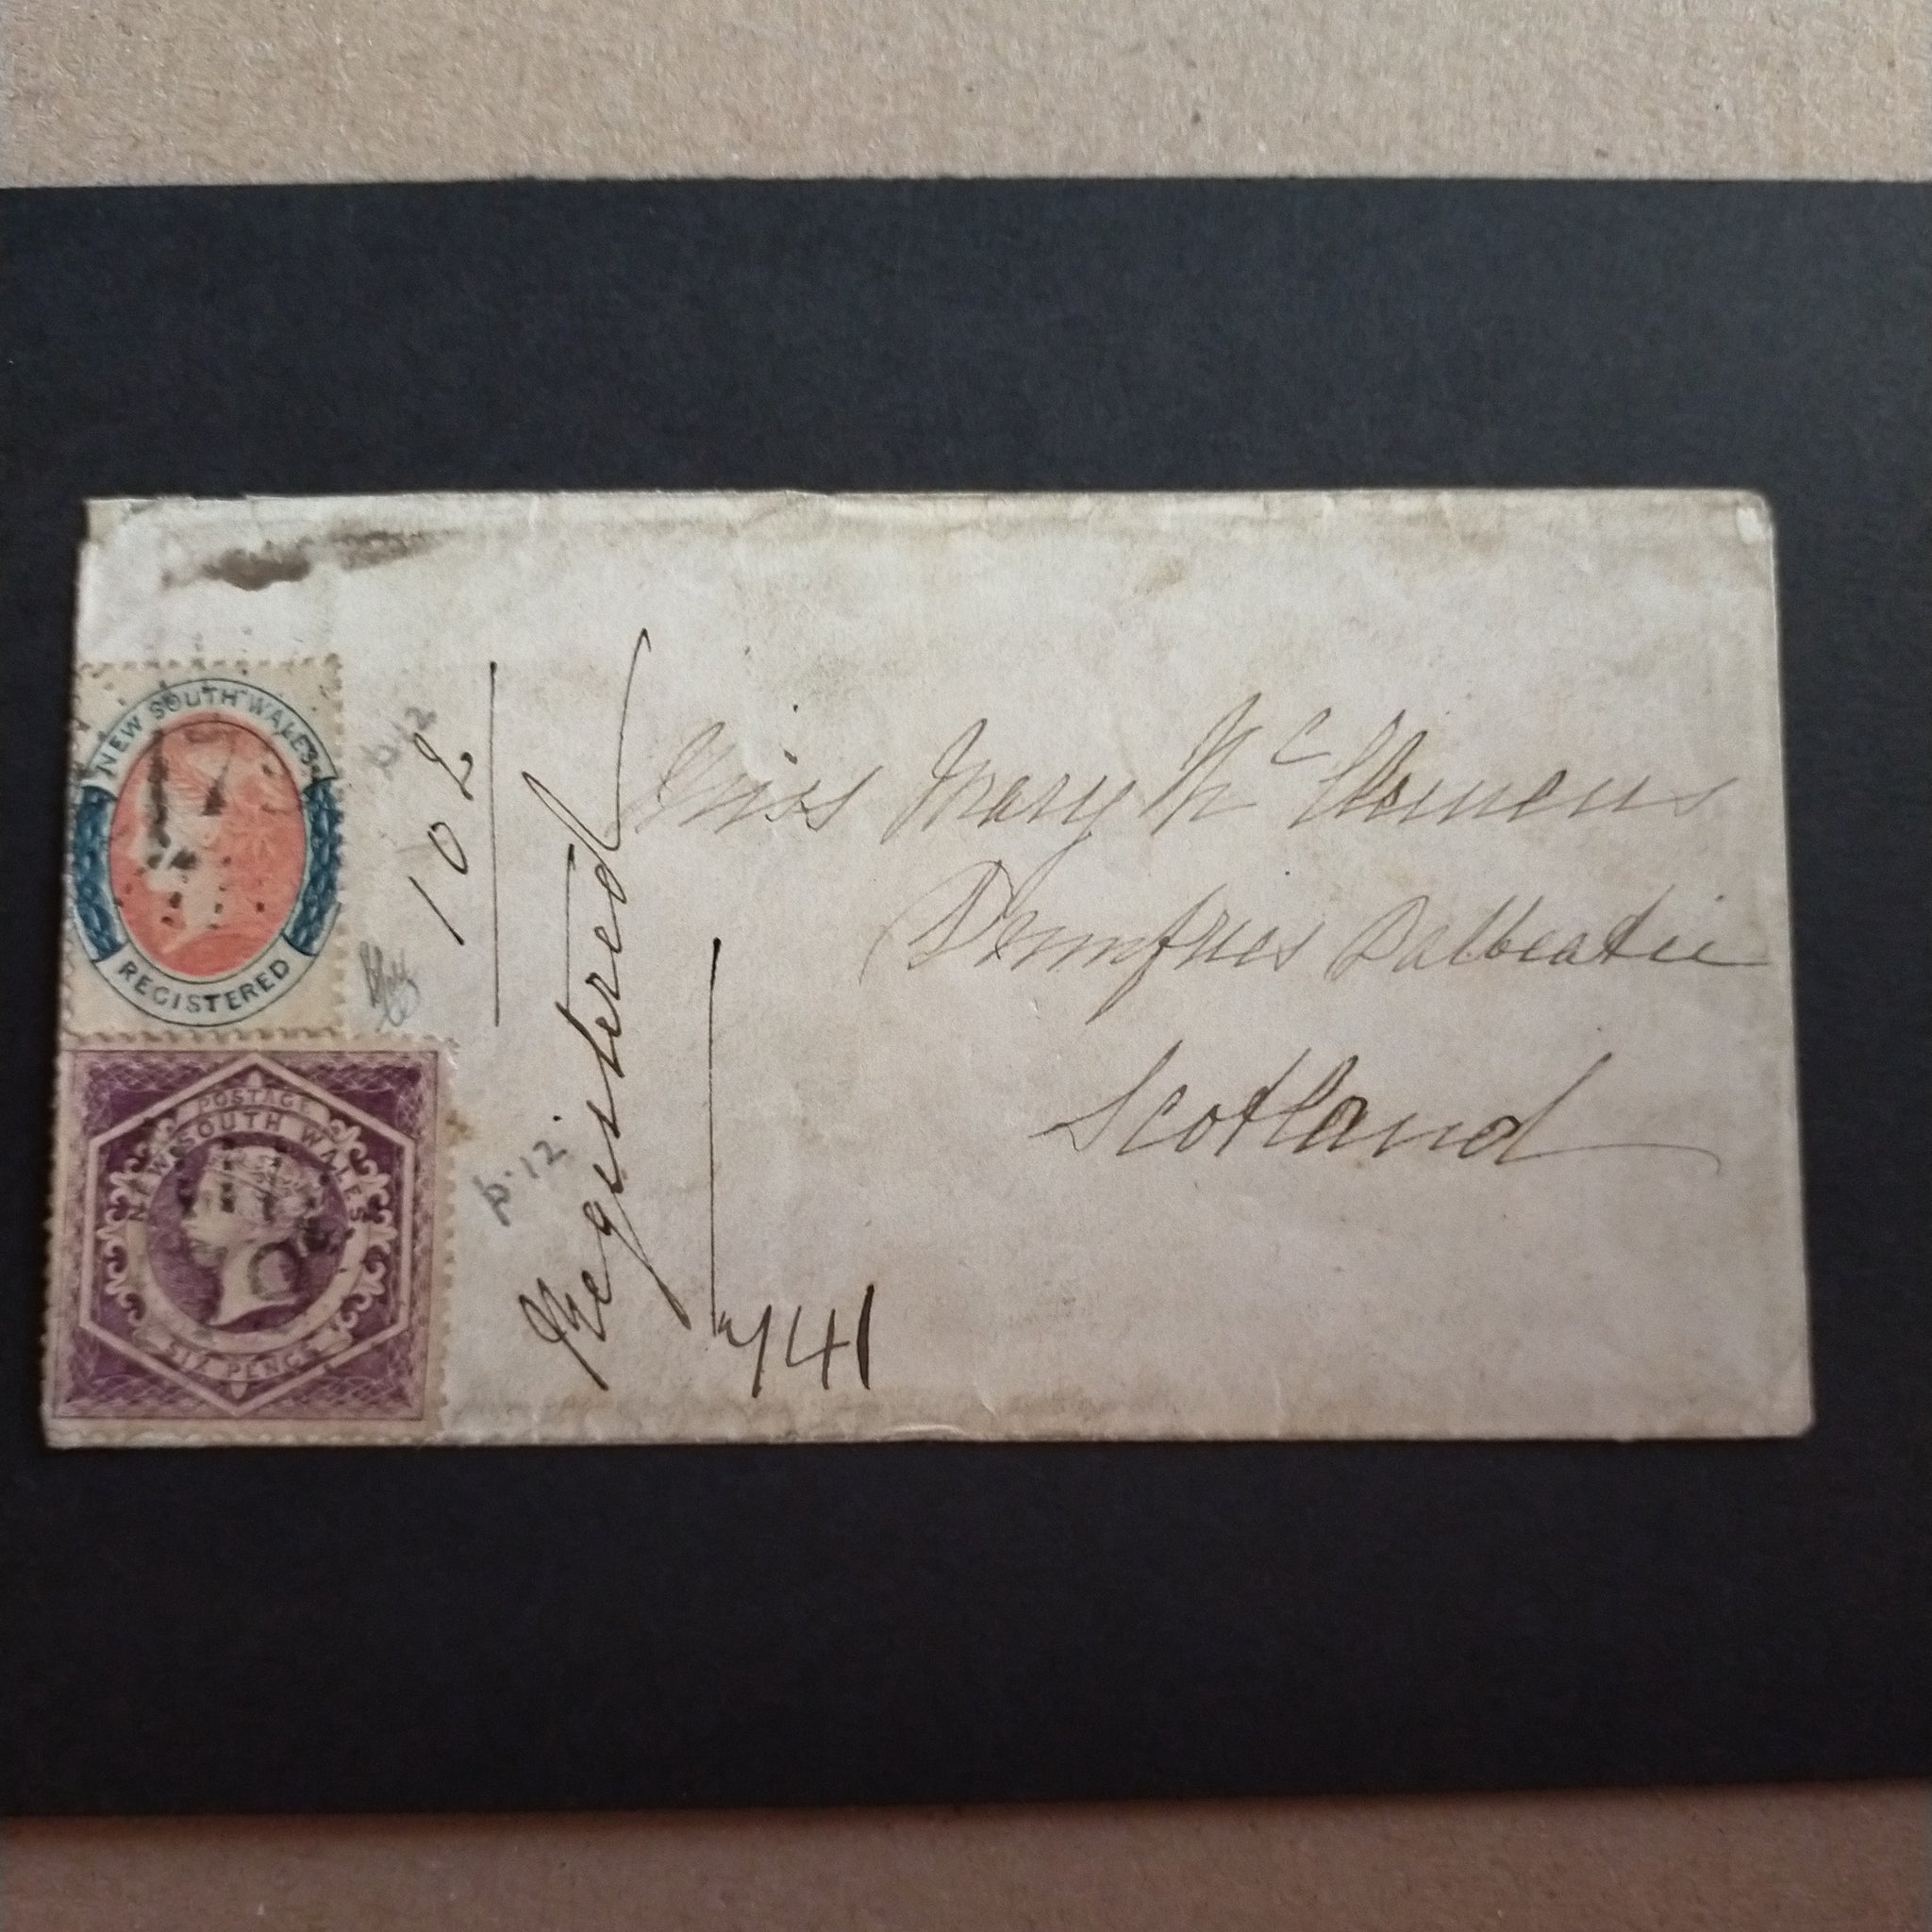 New South Wales Australia 1867 Registered Envelope from Balmain to Scotland bearing 6d Purple Diadem Perf 13 and 6d Registered Perf 13 cancelled